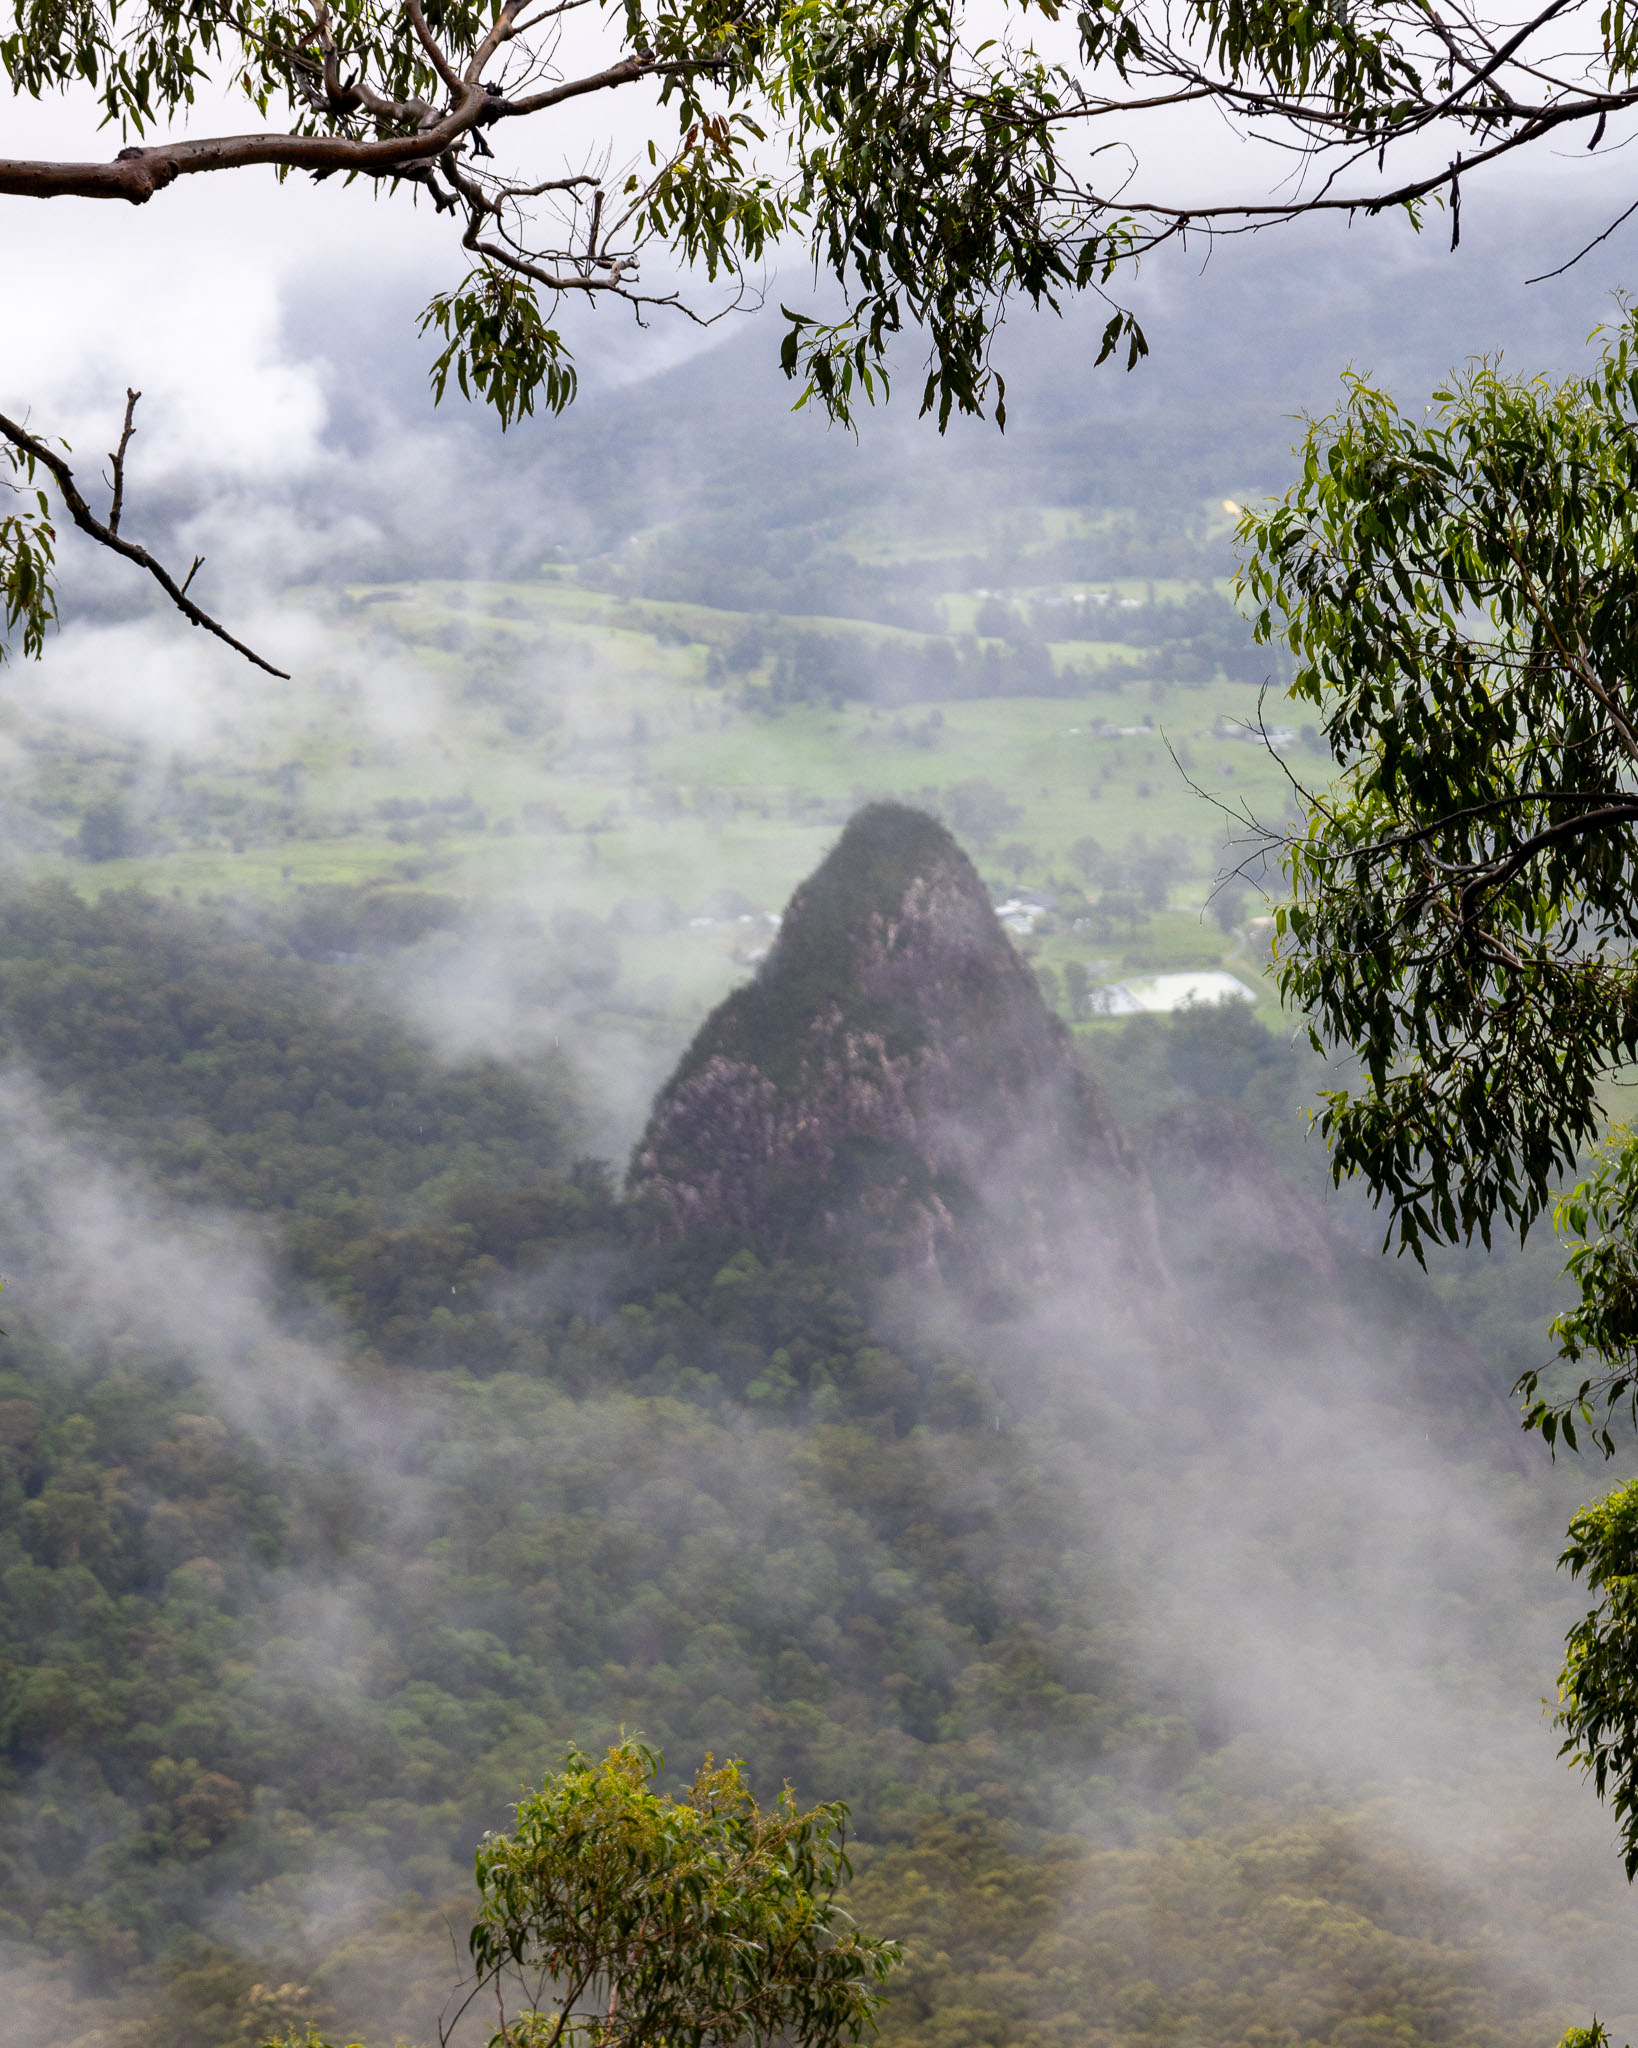 The unusual geological feature known as Egg Rock peeks through the mist.